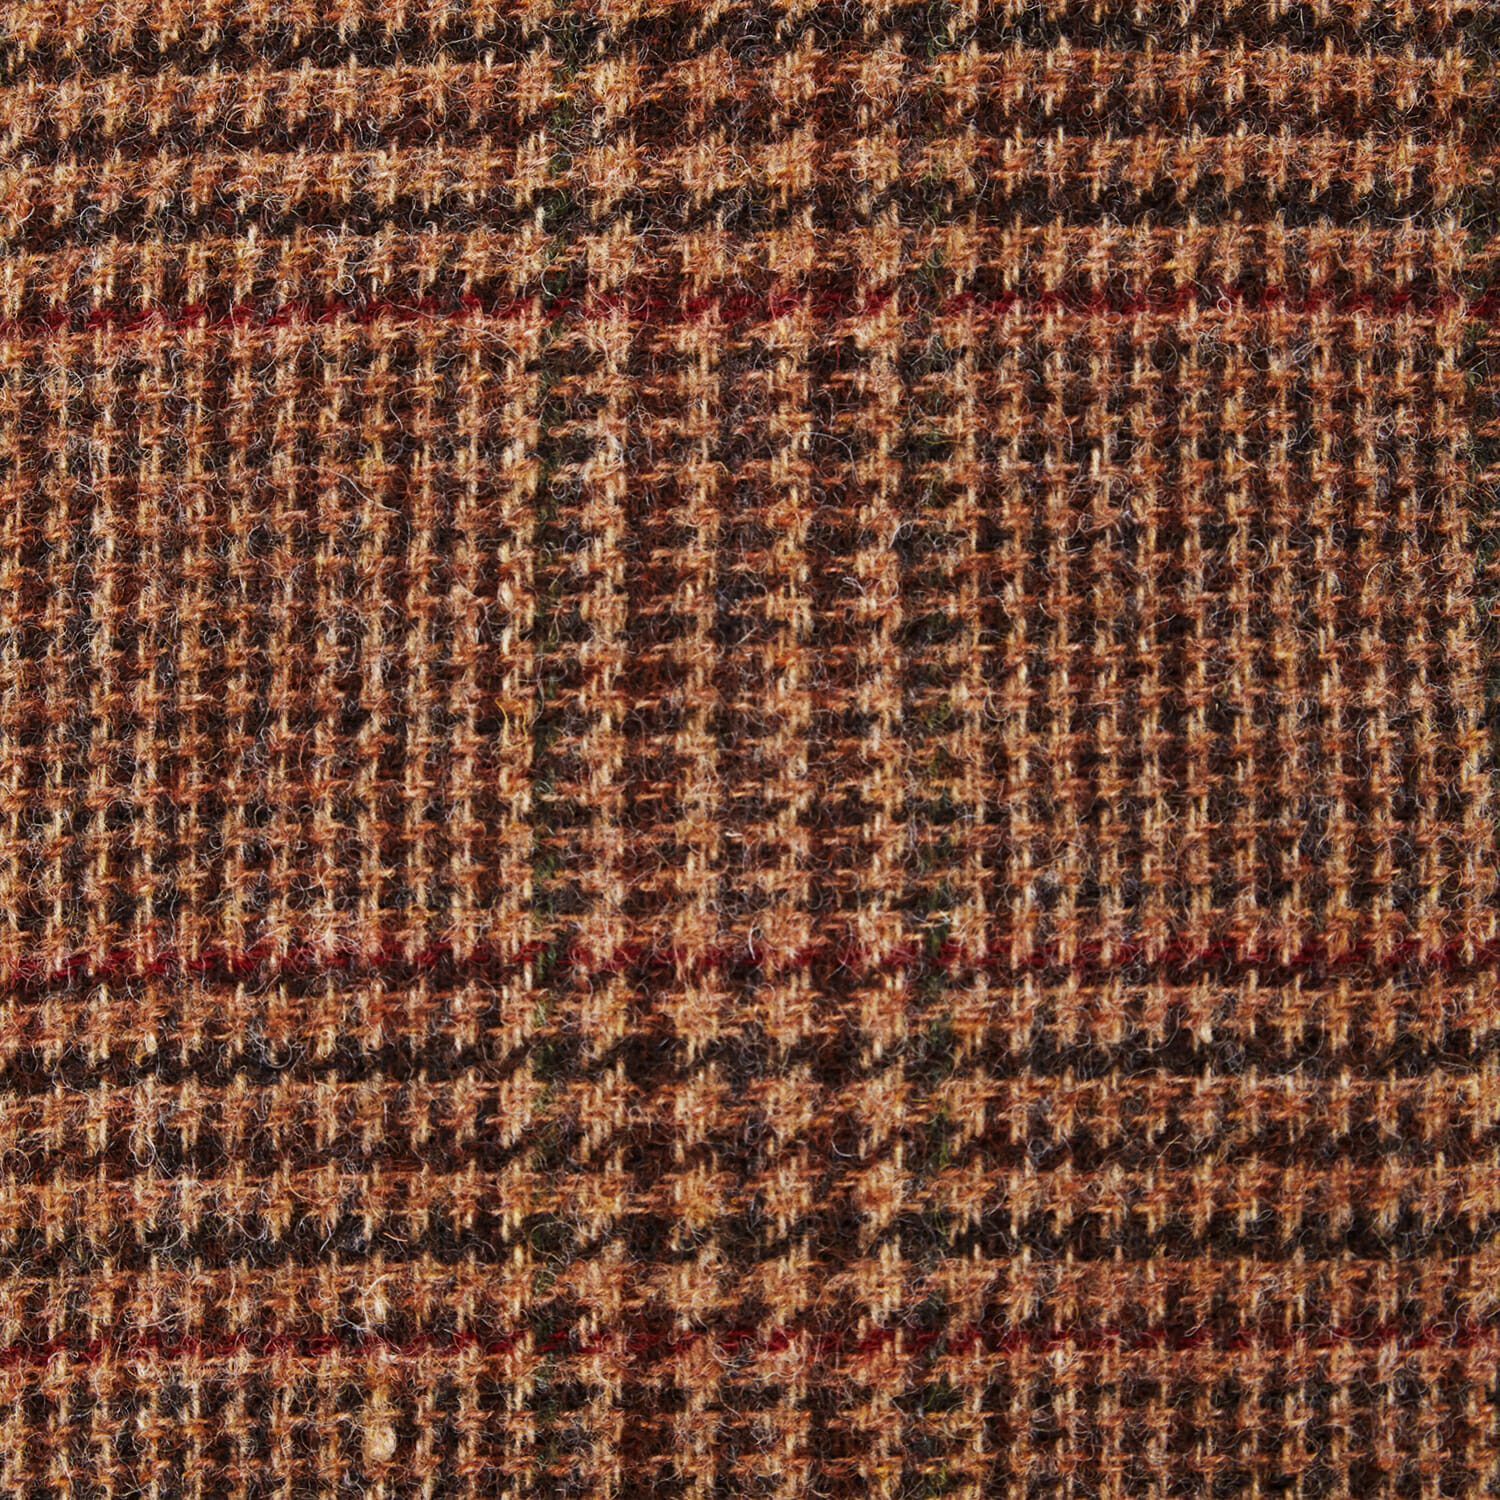 Glencheck in tweed